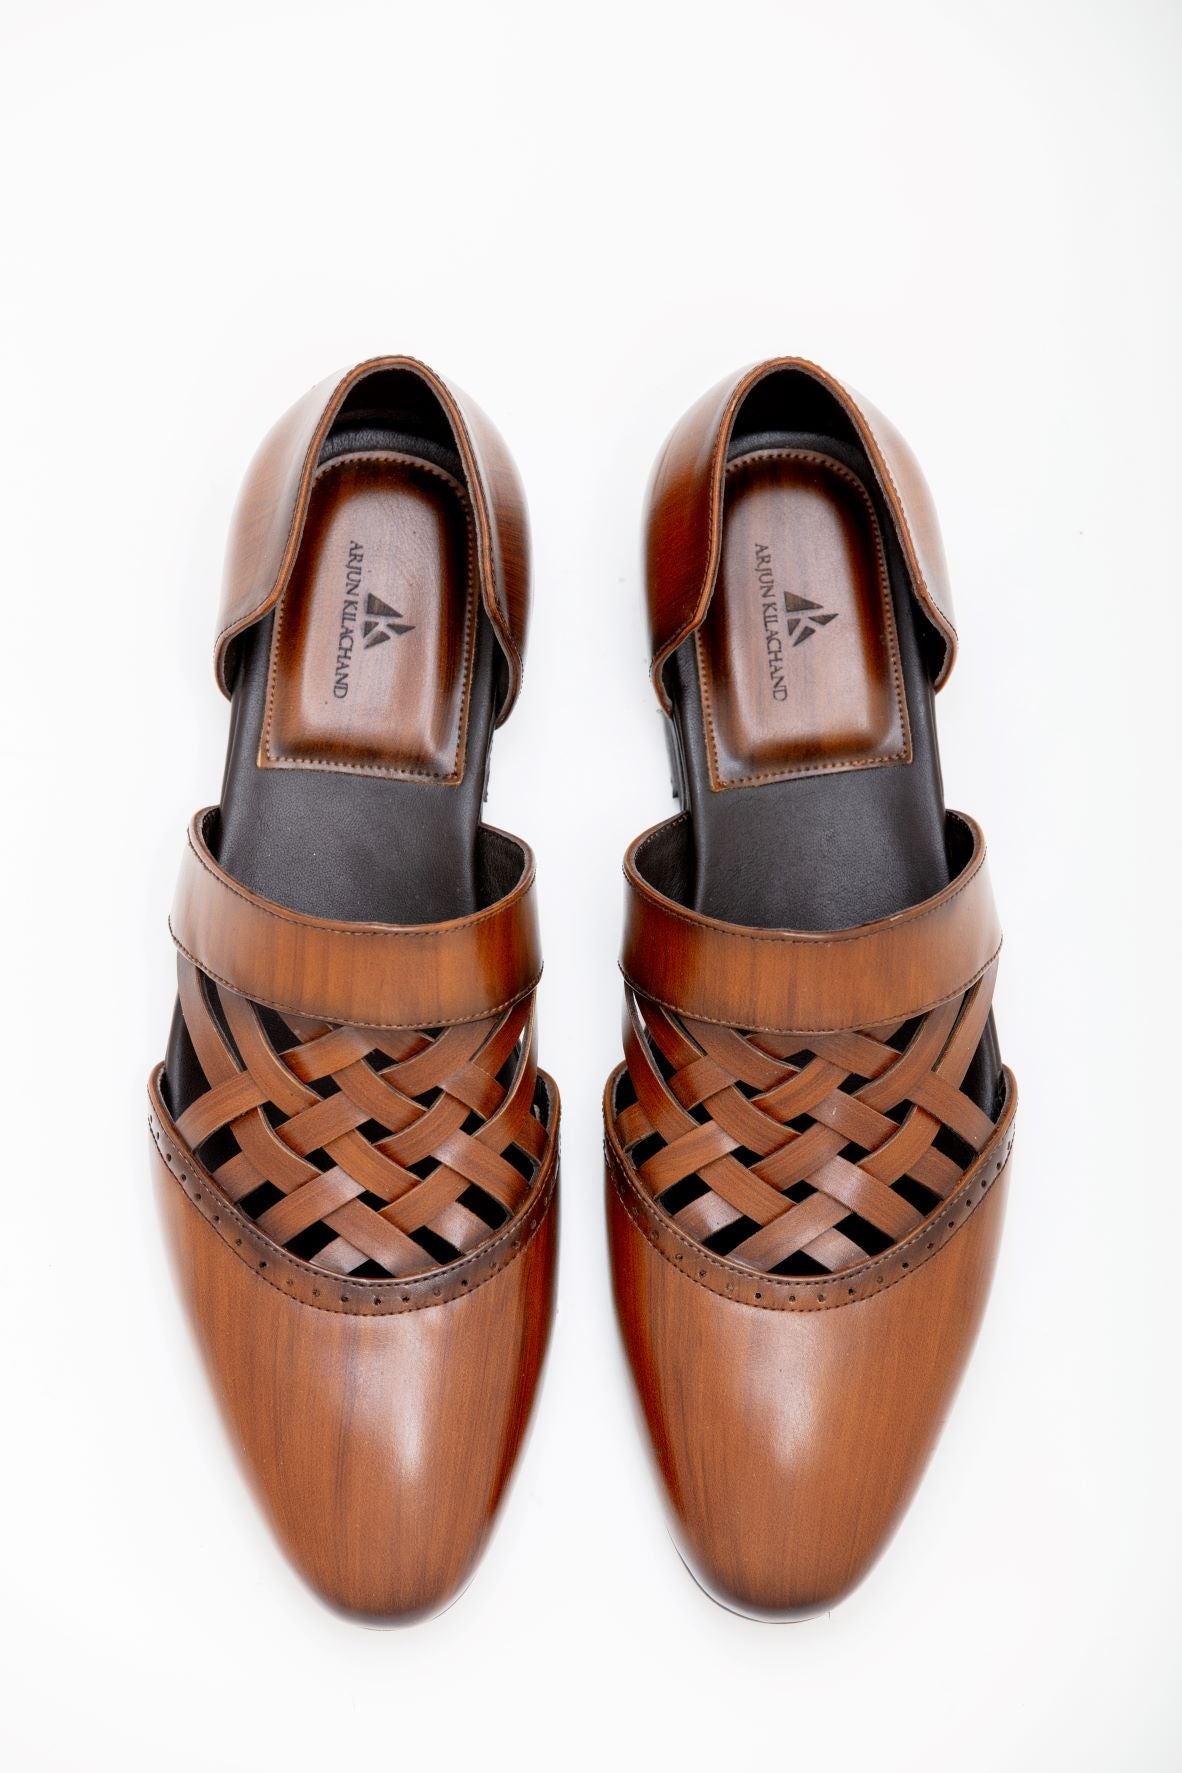 BROWN CRISS CROSS SANDAL - Kilachand Retail Private Limited